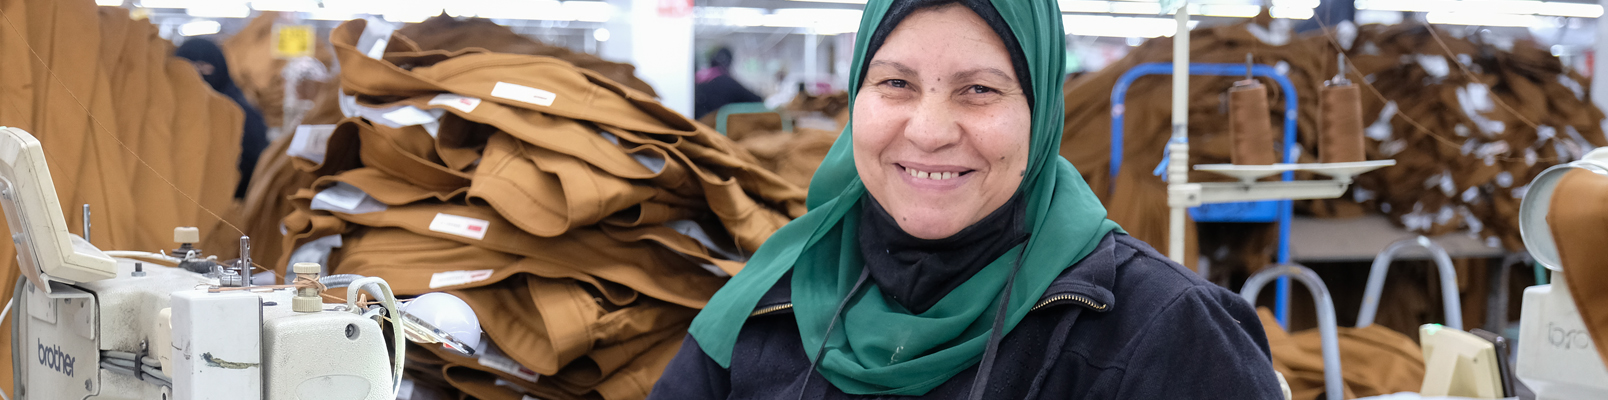 A person in a retail factory setting next to a pile of stacked pants smiles at the camera wearing a green headscarf